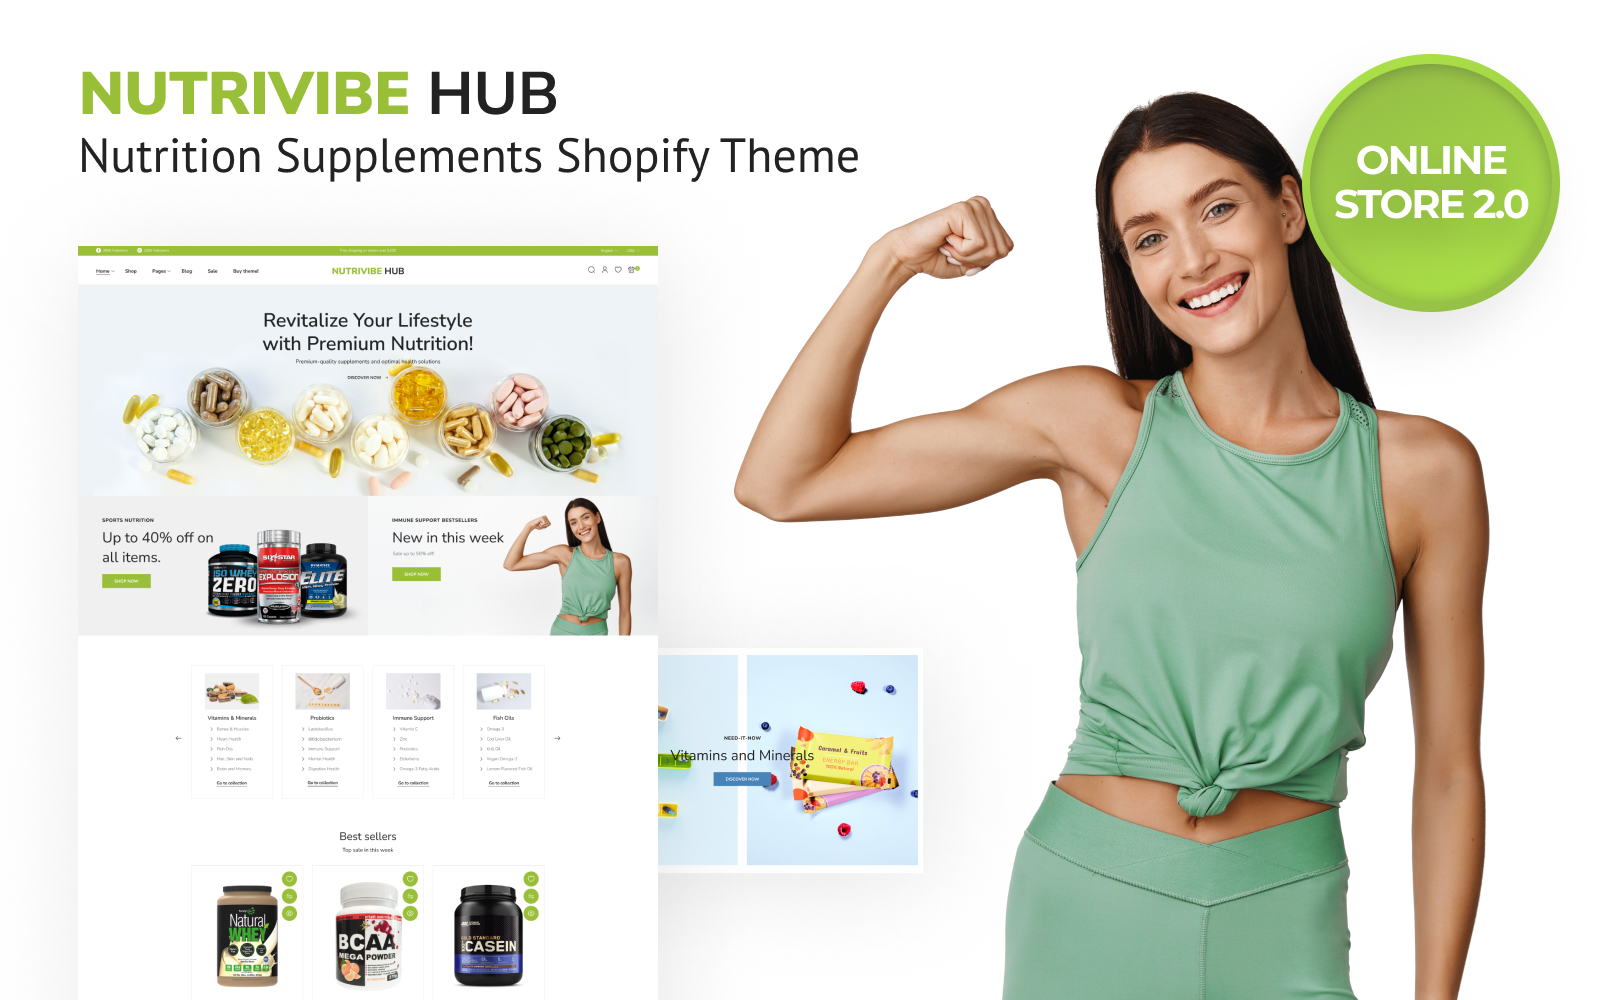 Nutrivibe Hub - Nutrition Supplements Shopify Online Store 2.0 Theme Shopify Theme